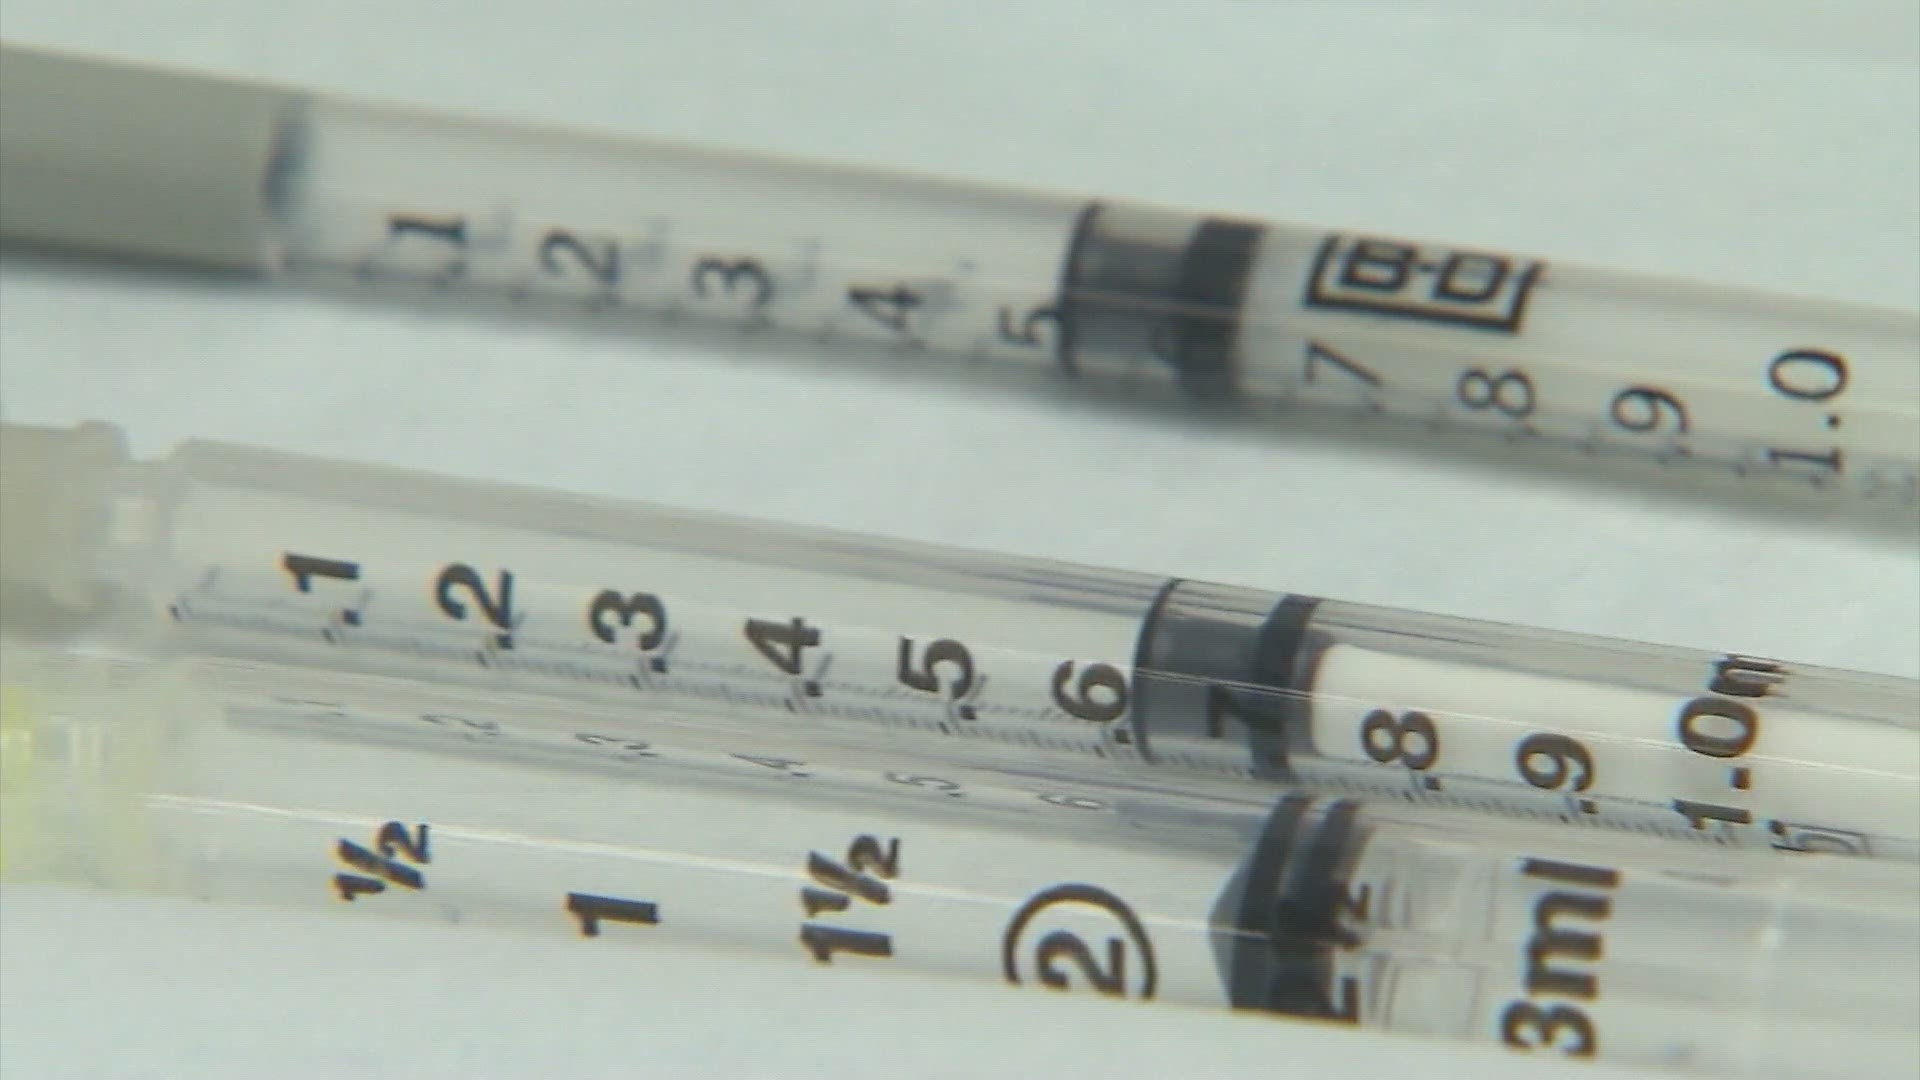 The counterfeit versions of botox have been reported in several states.